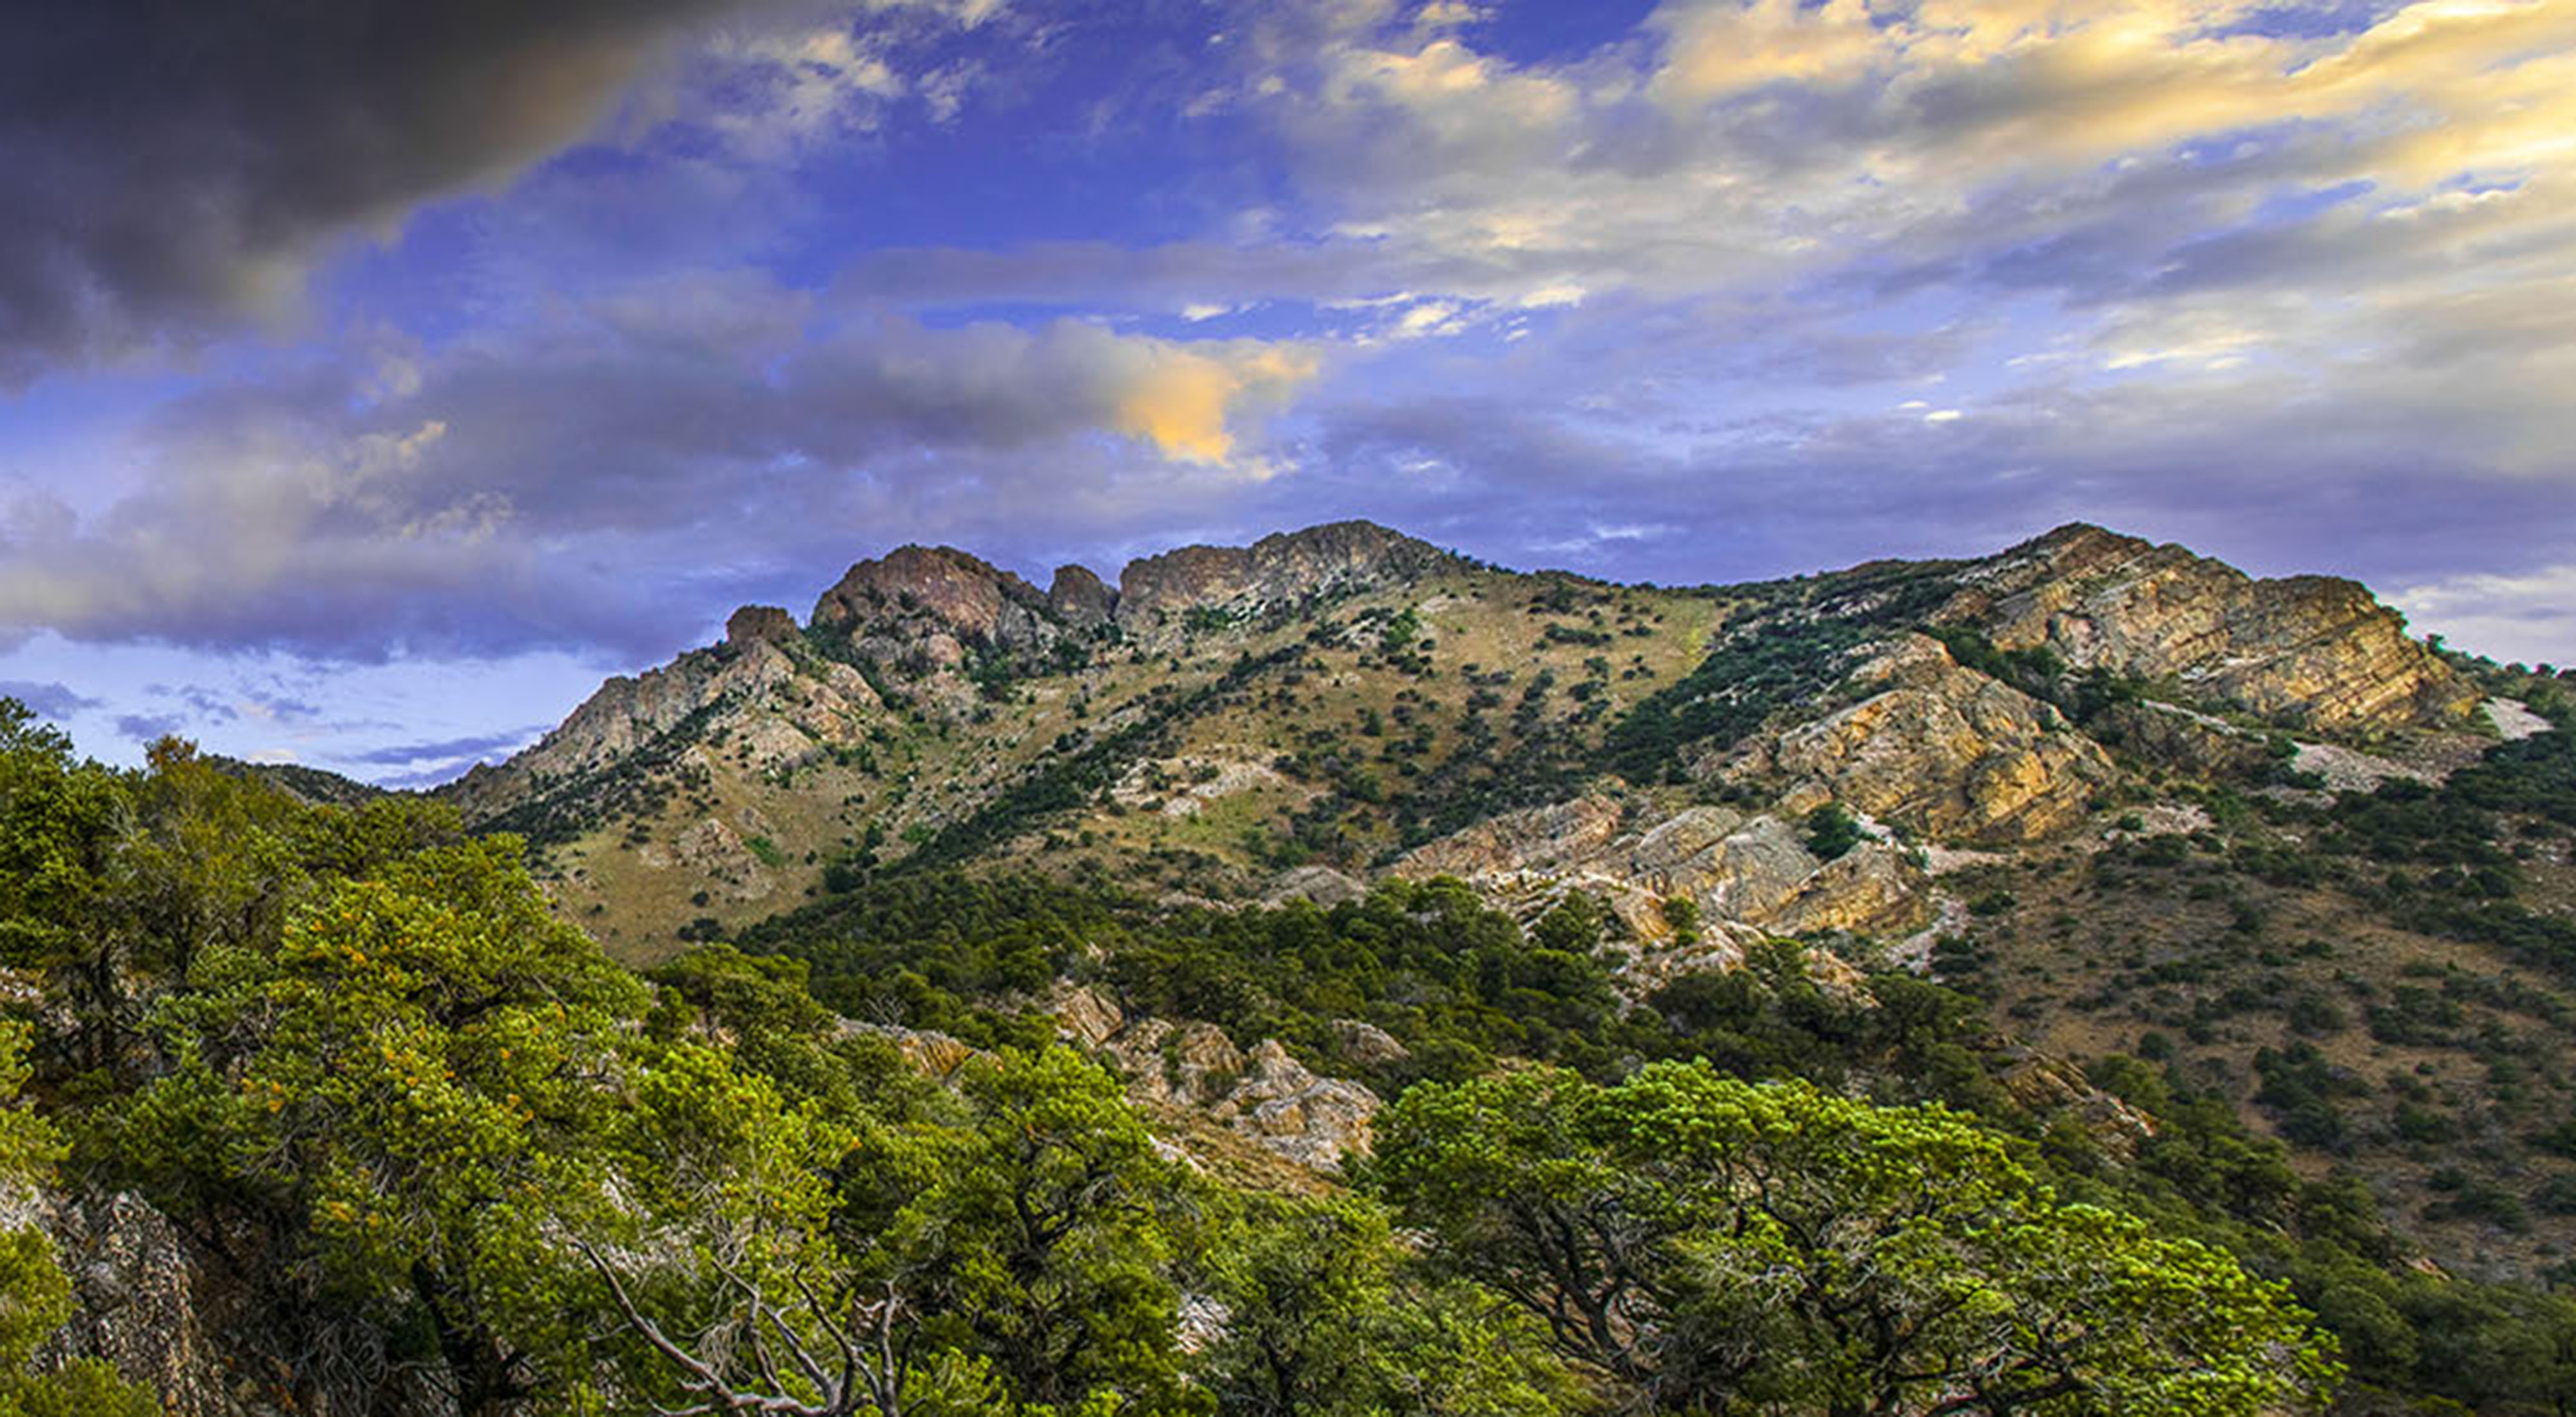 Landscape view of a rocky mountain range with green treetops in the foreground and a dramatic cloudy sky overhead.